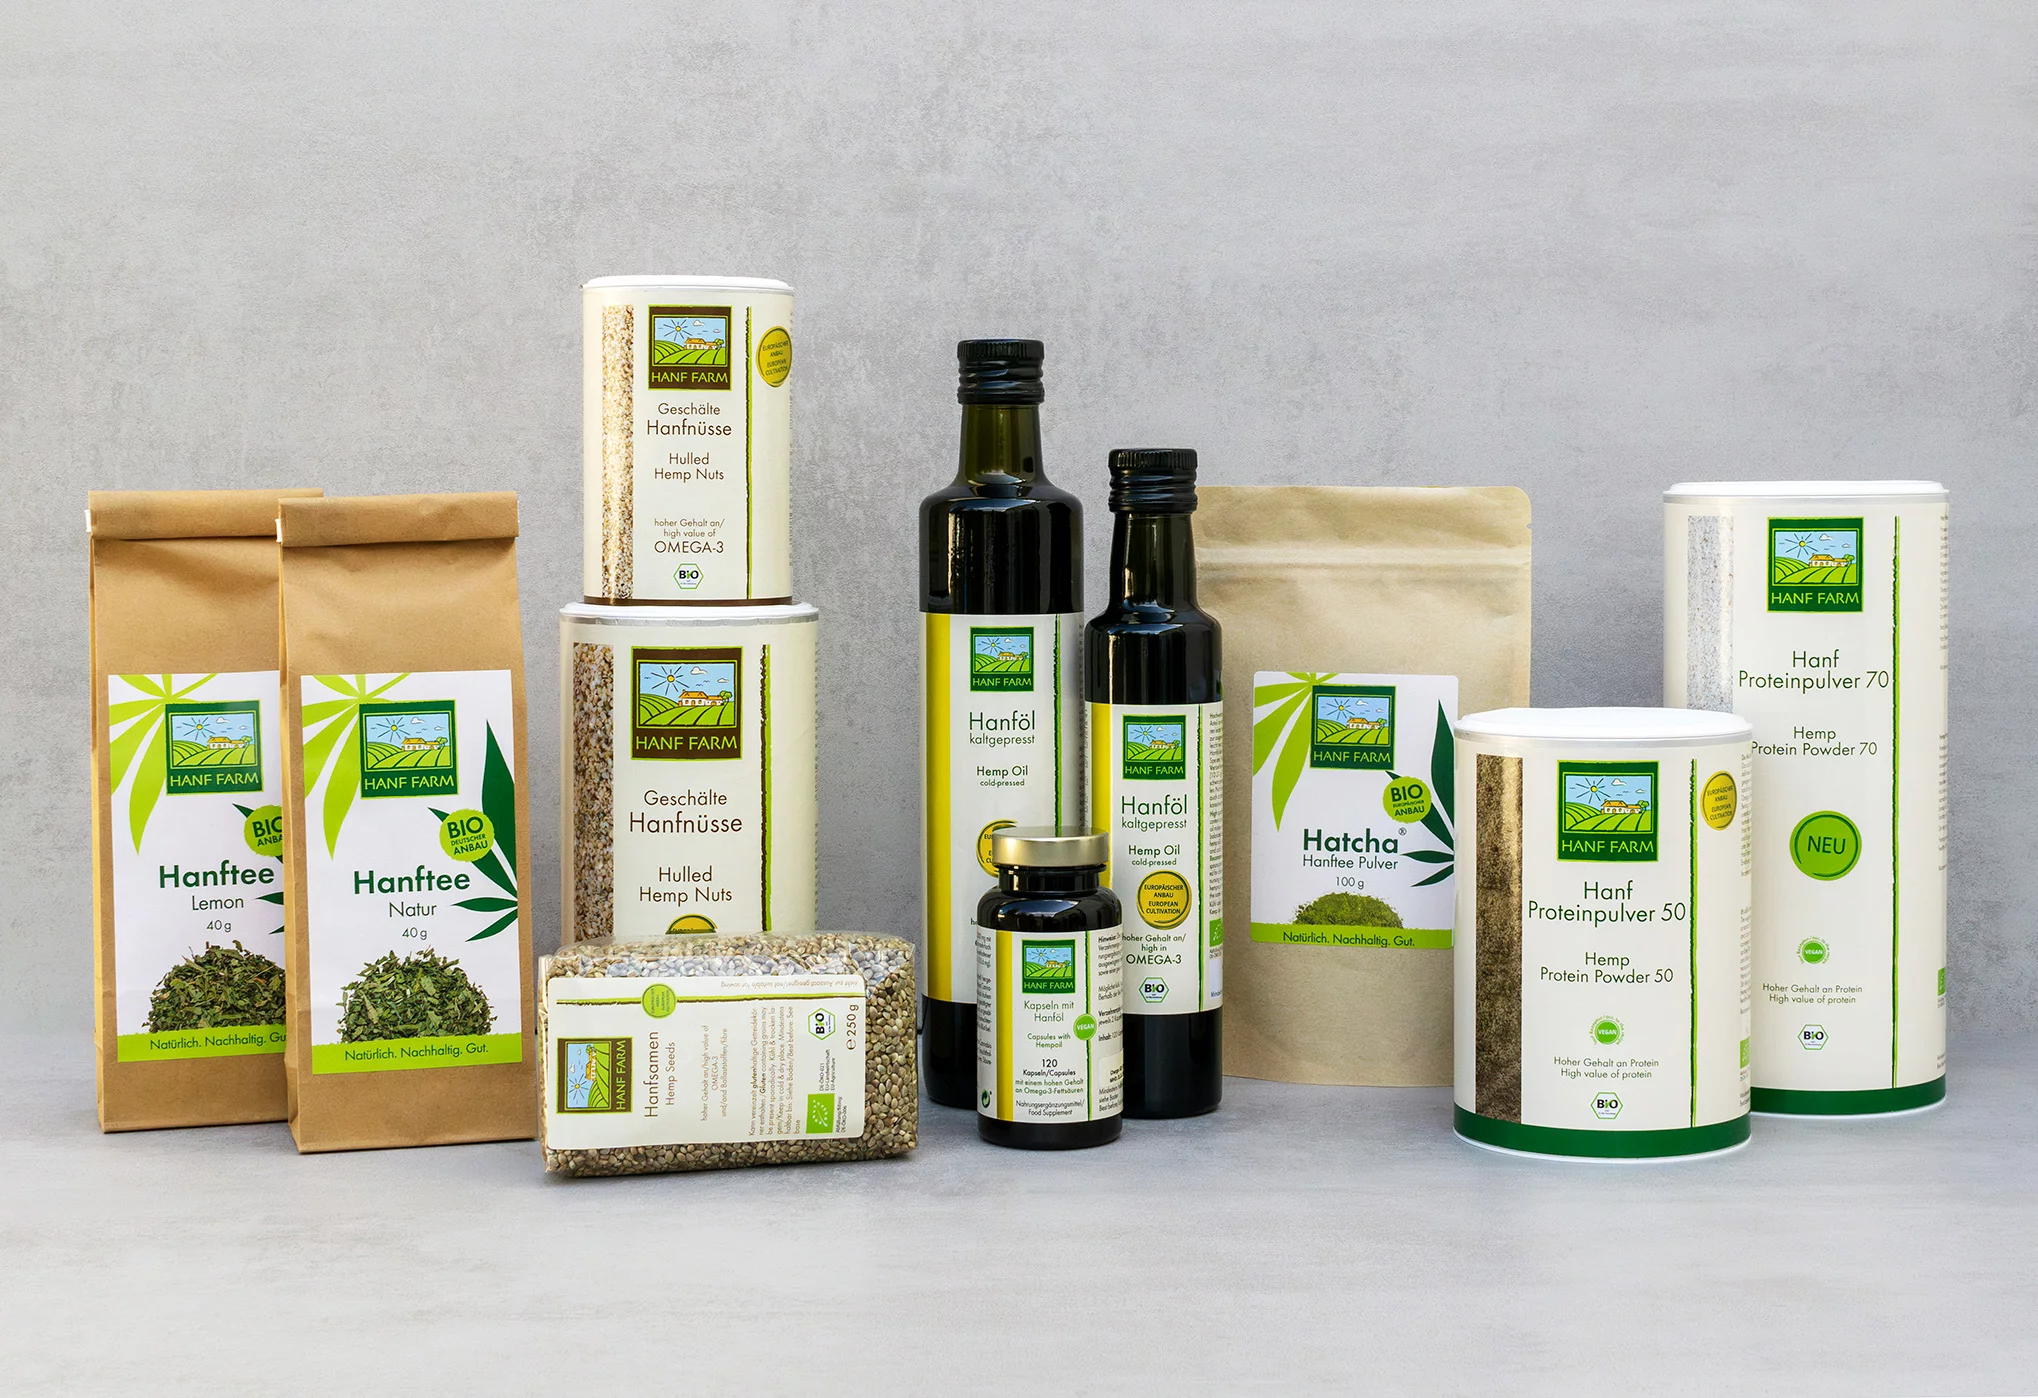 Hemp products from the hemp pioneer
As the first hemp specialty store in Düsseldorf, we have been selling hemp products of the highest and tested quality for 25 years.